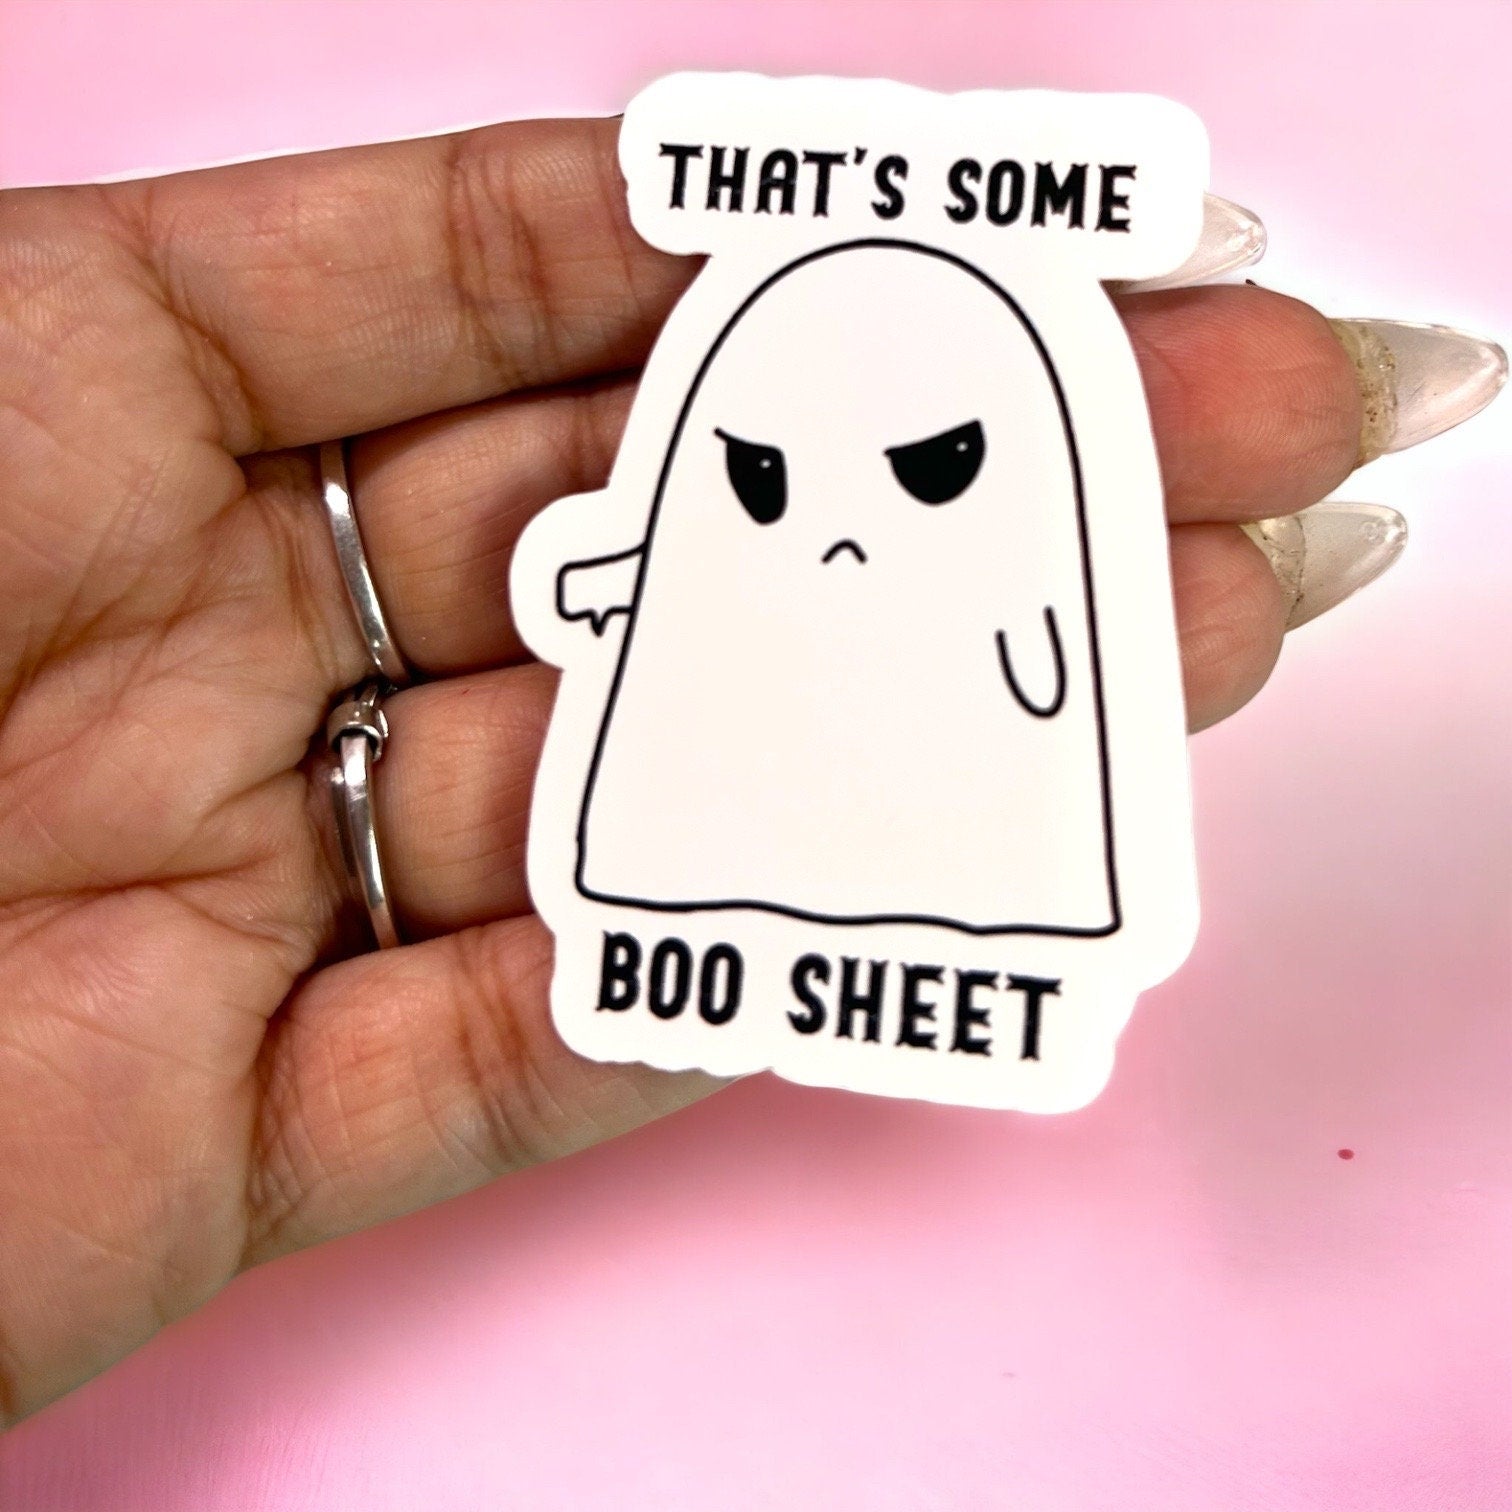 Funny Ghost sticker, Halloween stickers, spooky stickers, kindle stickers, that's some boo sheet, funny quotes, cute ghost, laptop, phone